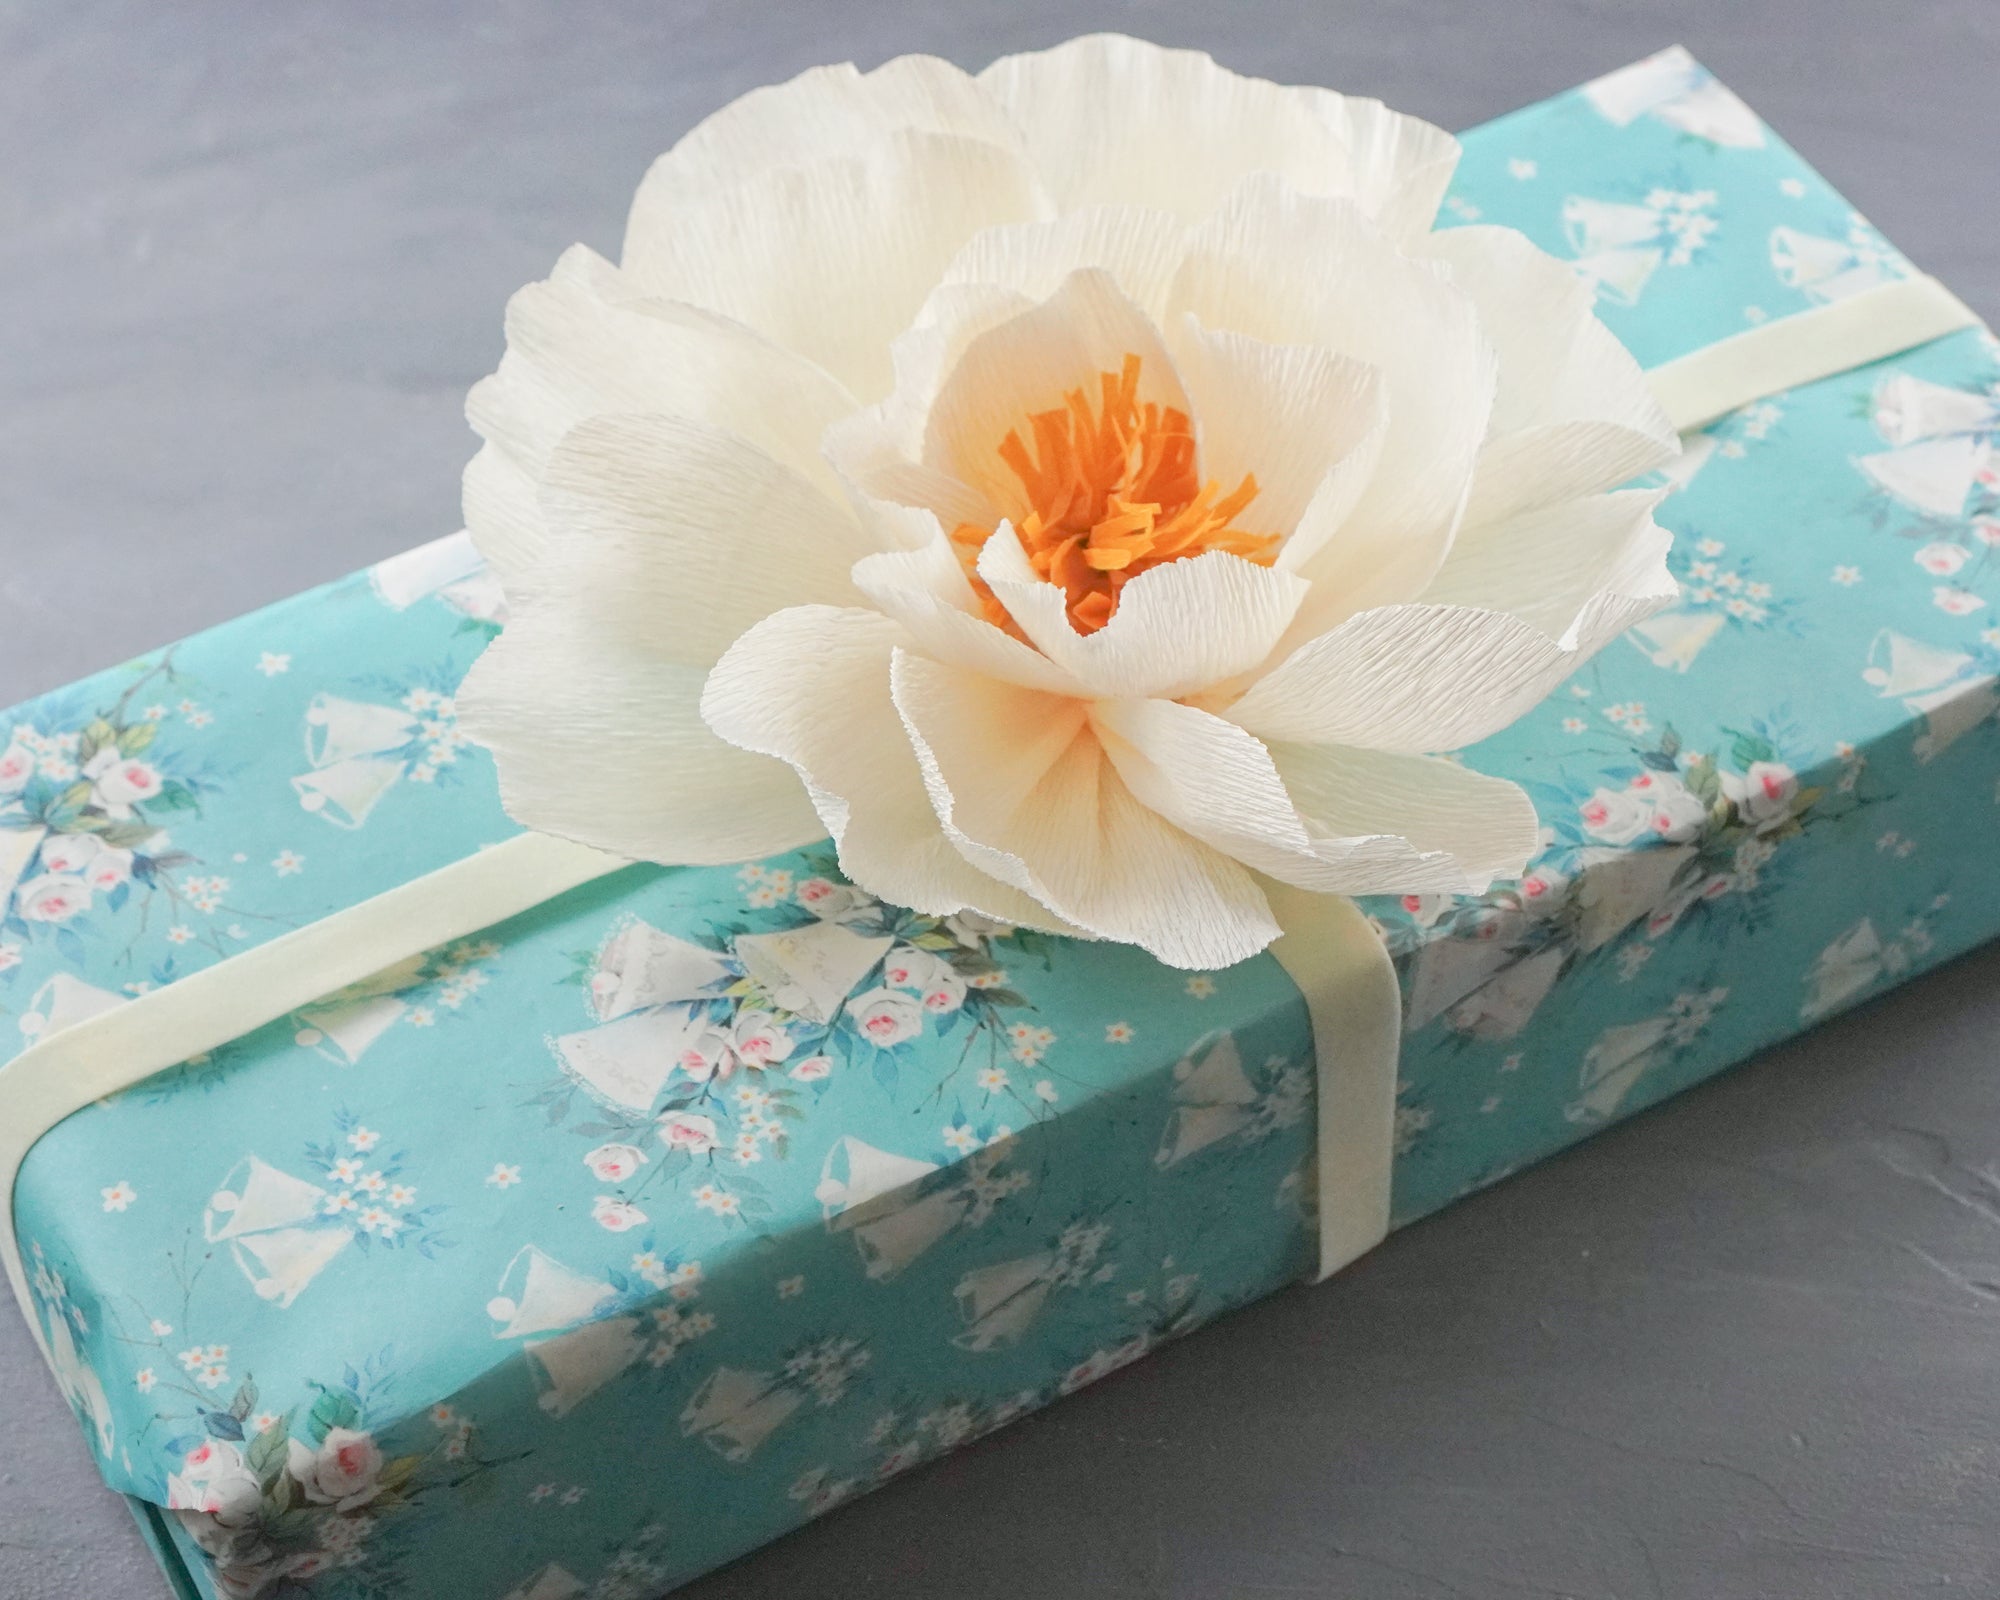 Flower Wrapping Paper,Florist Bouquet Supplies,DIY Crafts,Gift